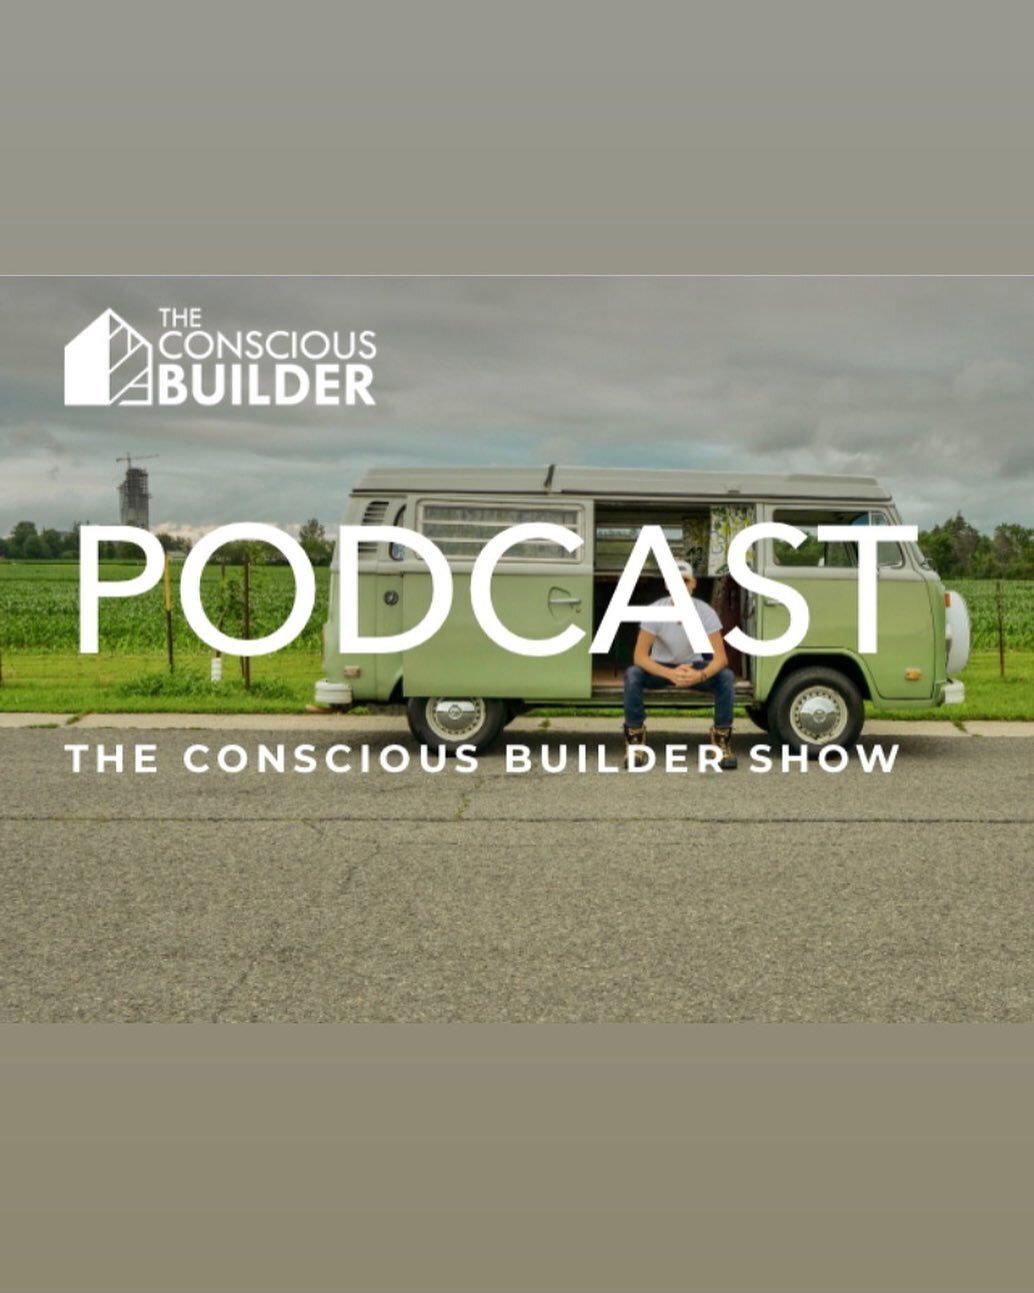 I&rsquo;m very excited to be asked to chat with Casey today on the @the_conscious_builder #podcast ! I&rsquo;ll be sharing my story about getting into the #homeenergyefficiency industry and the #thomashouseproject. 
.
.
Check it out on #applepodcasts